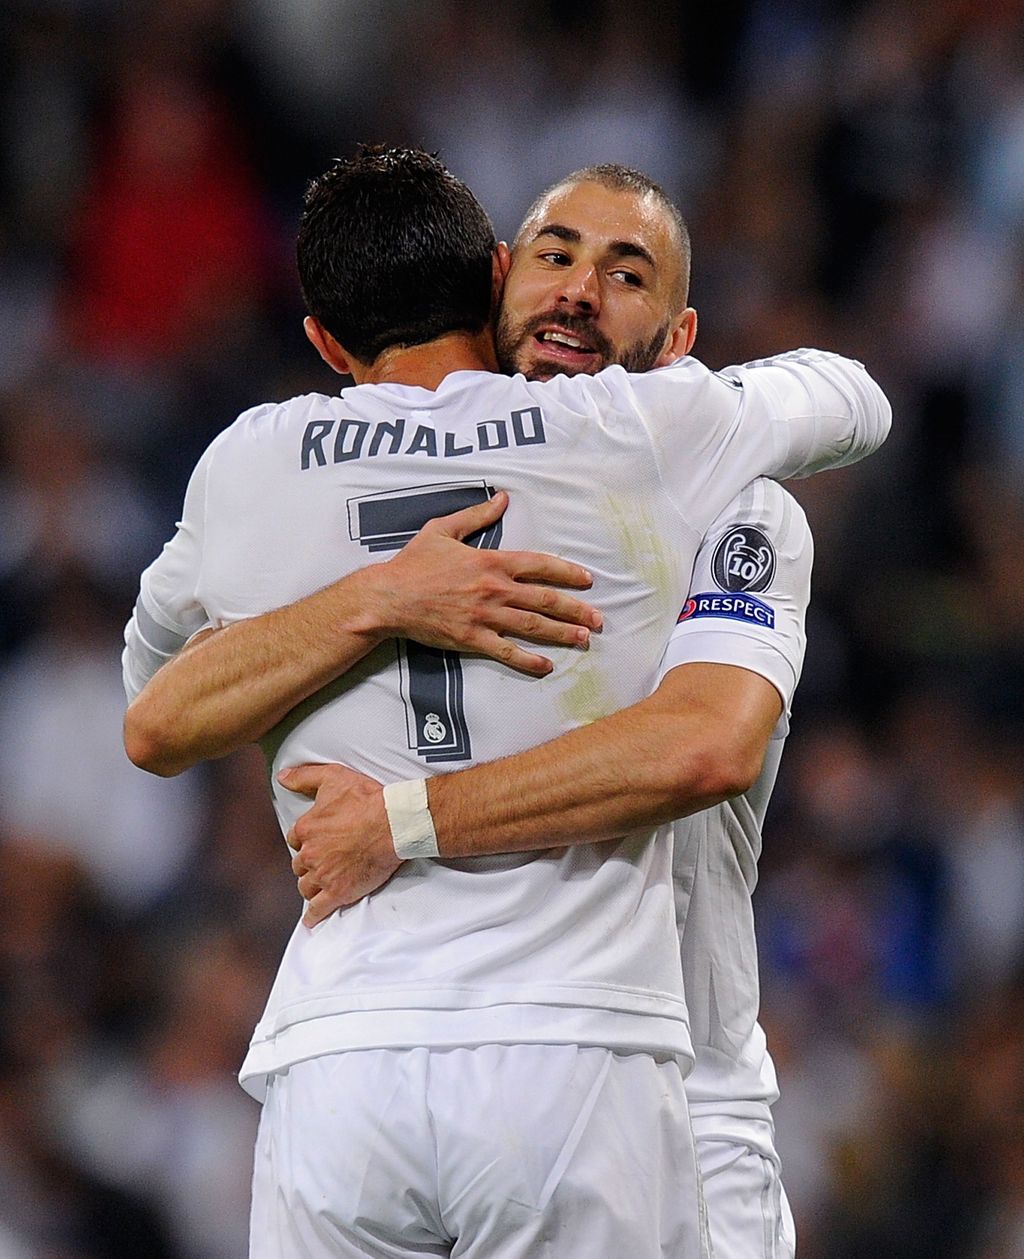 MADRID, SPAIN - SEPTEMBER 15:  Karim Benzema of Real Madrid celebrates with Cristiano Ronaldo after scoring Real's opening goal during the UEFA Champions League Group A match between Real Madrid and Shakhtar Donetsk at estadio Santiago Bernabeu on September 15, 2015 in Madrid, Spain.  (Photo by Denis Doyle/Getty Images)